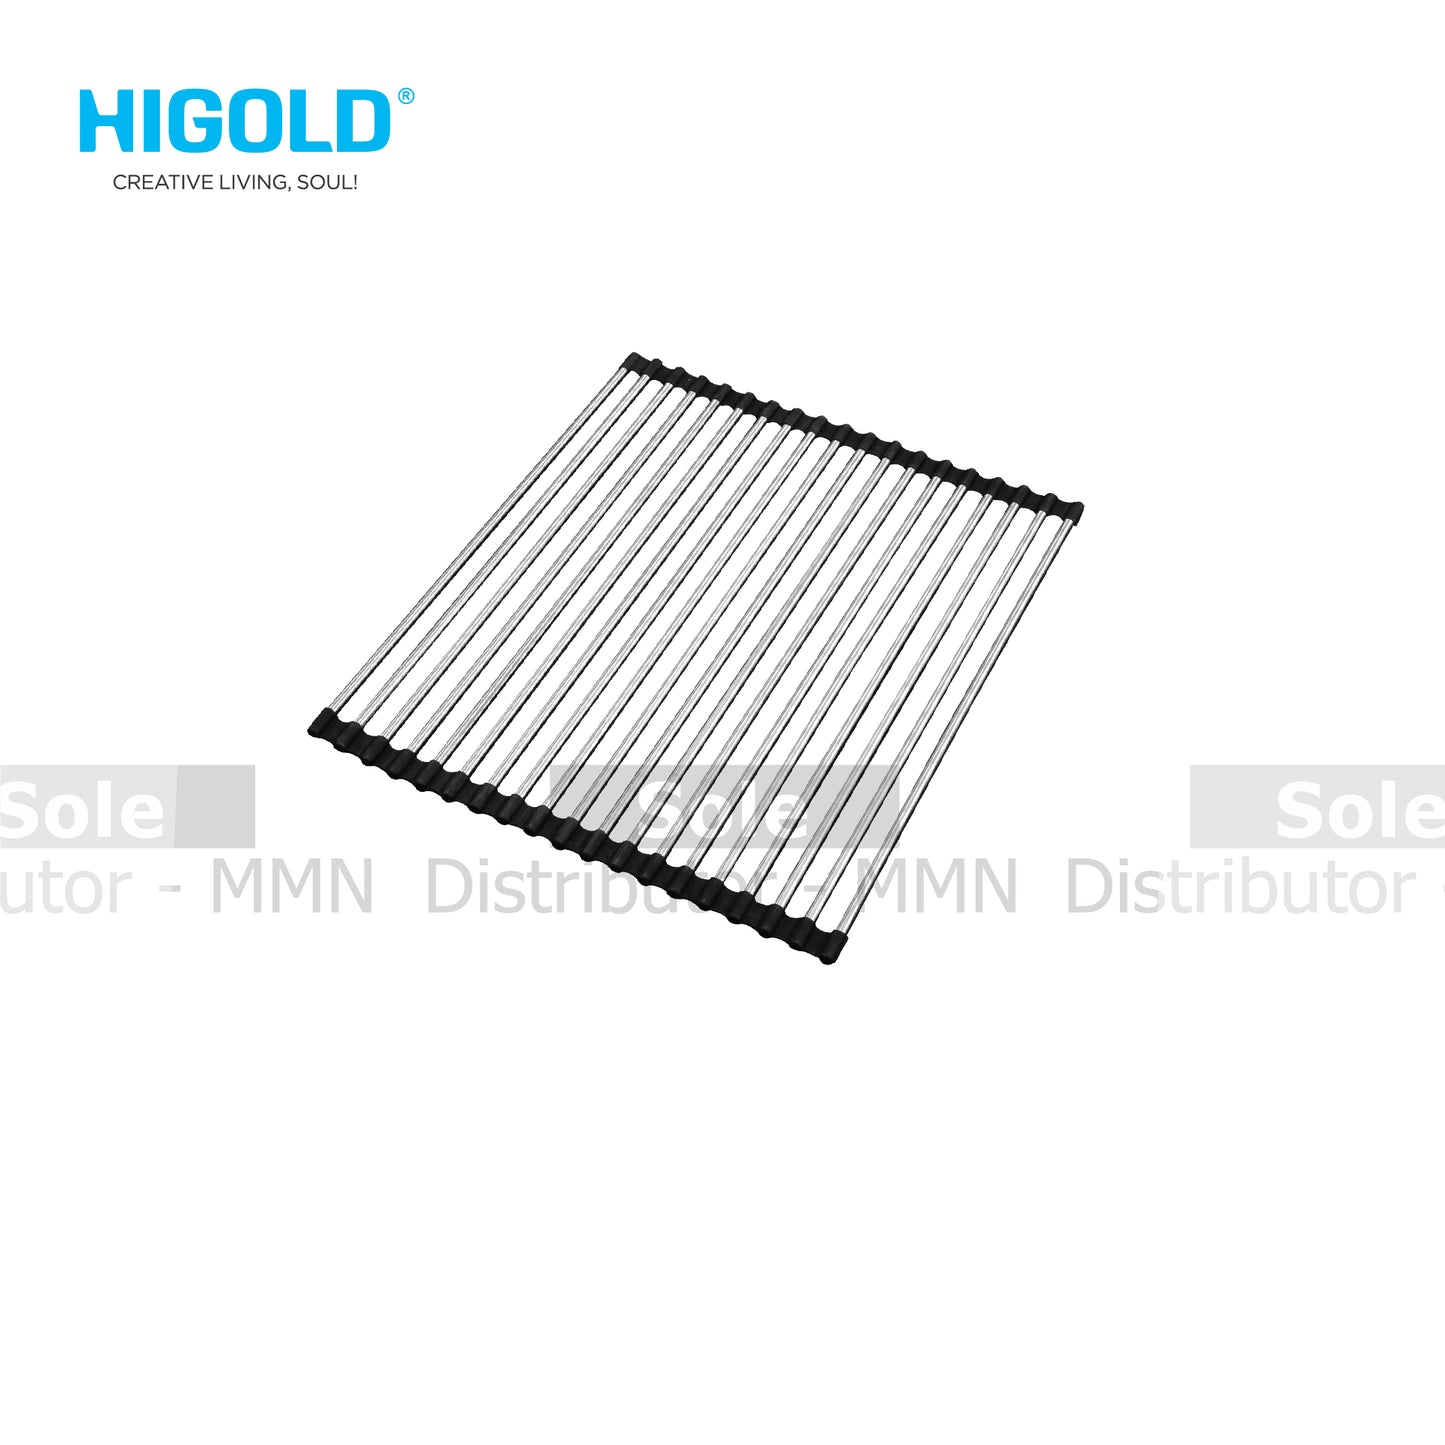 Higold Rollmat For Kitchen Sink Dimension 440x320x9mm Stainless Steel - HG987017 (987002)